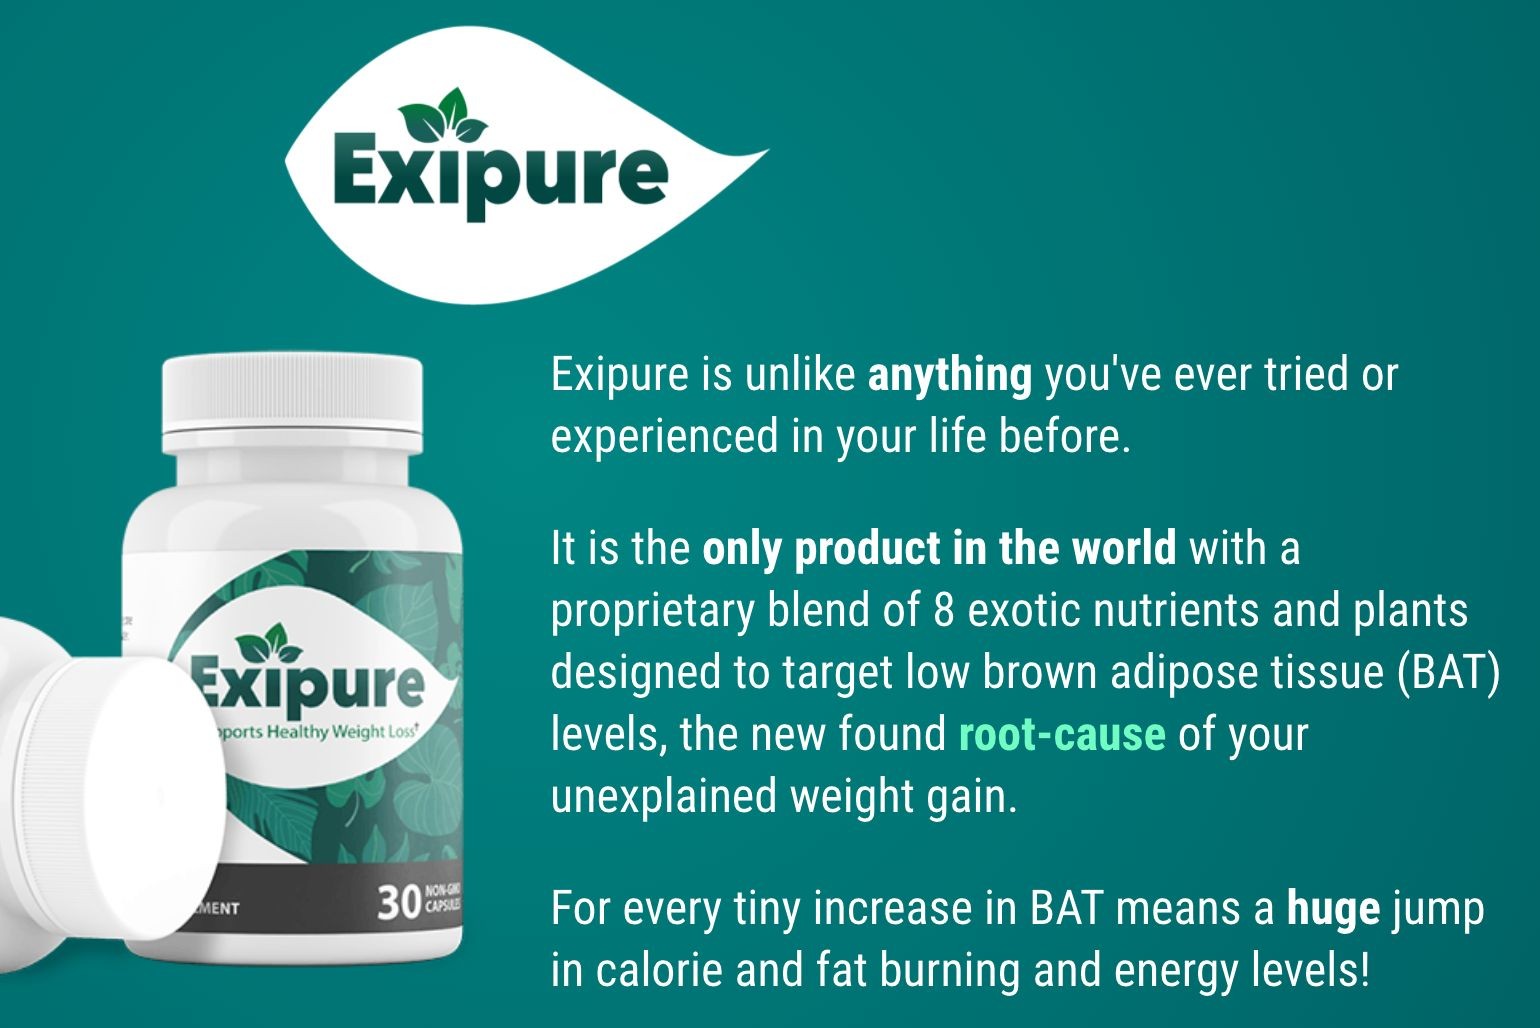 Exipure Reviews: Critical Report Highlights Dangerous Side Effects Risk! BBJ Today